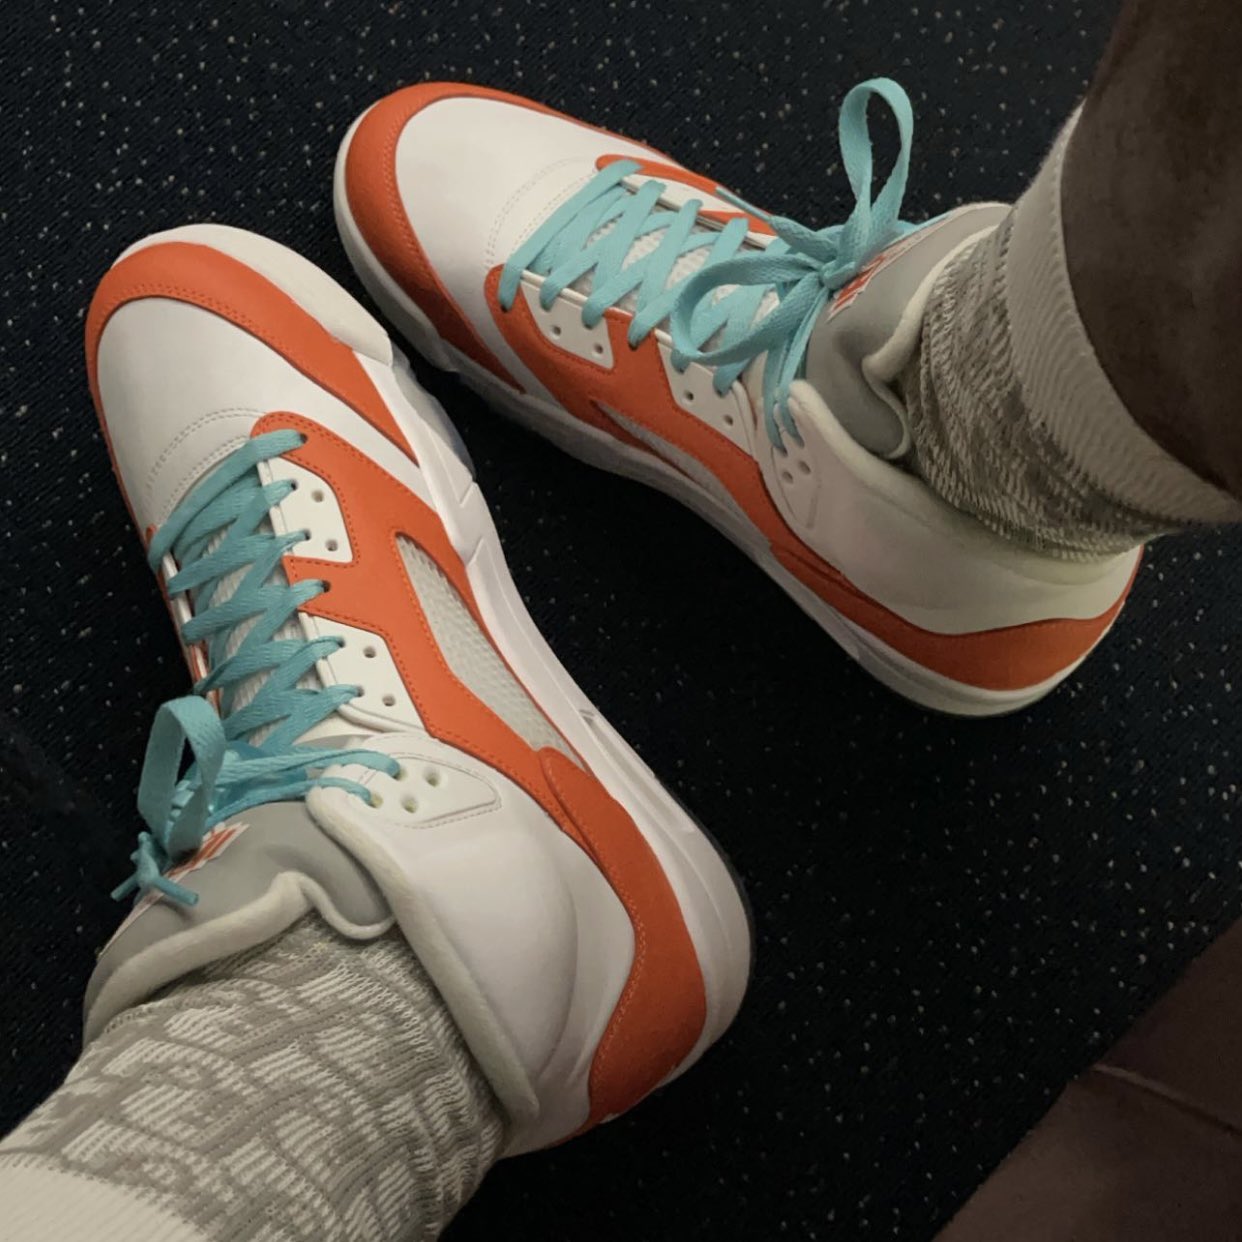 Carmelo Anthony hilariously accuses PJ Tucker of stealing his shoes